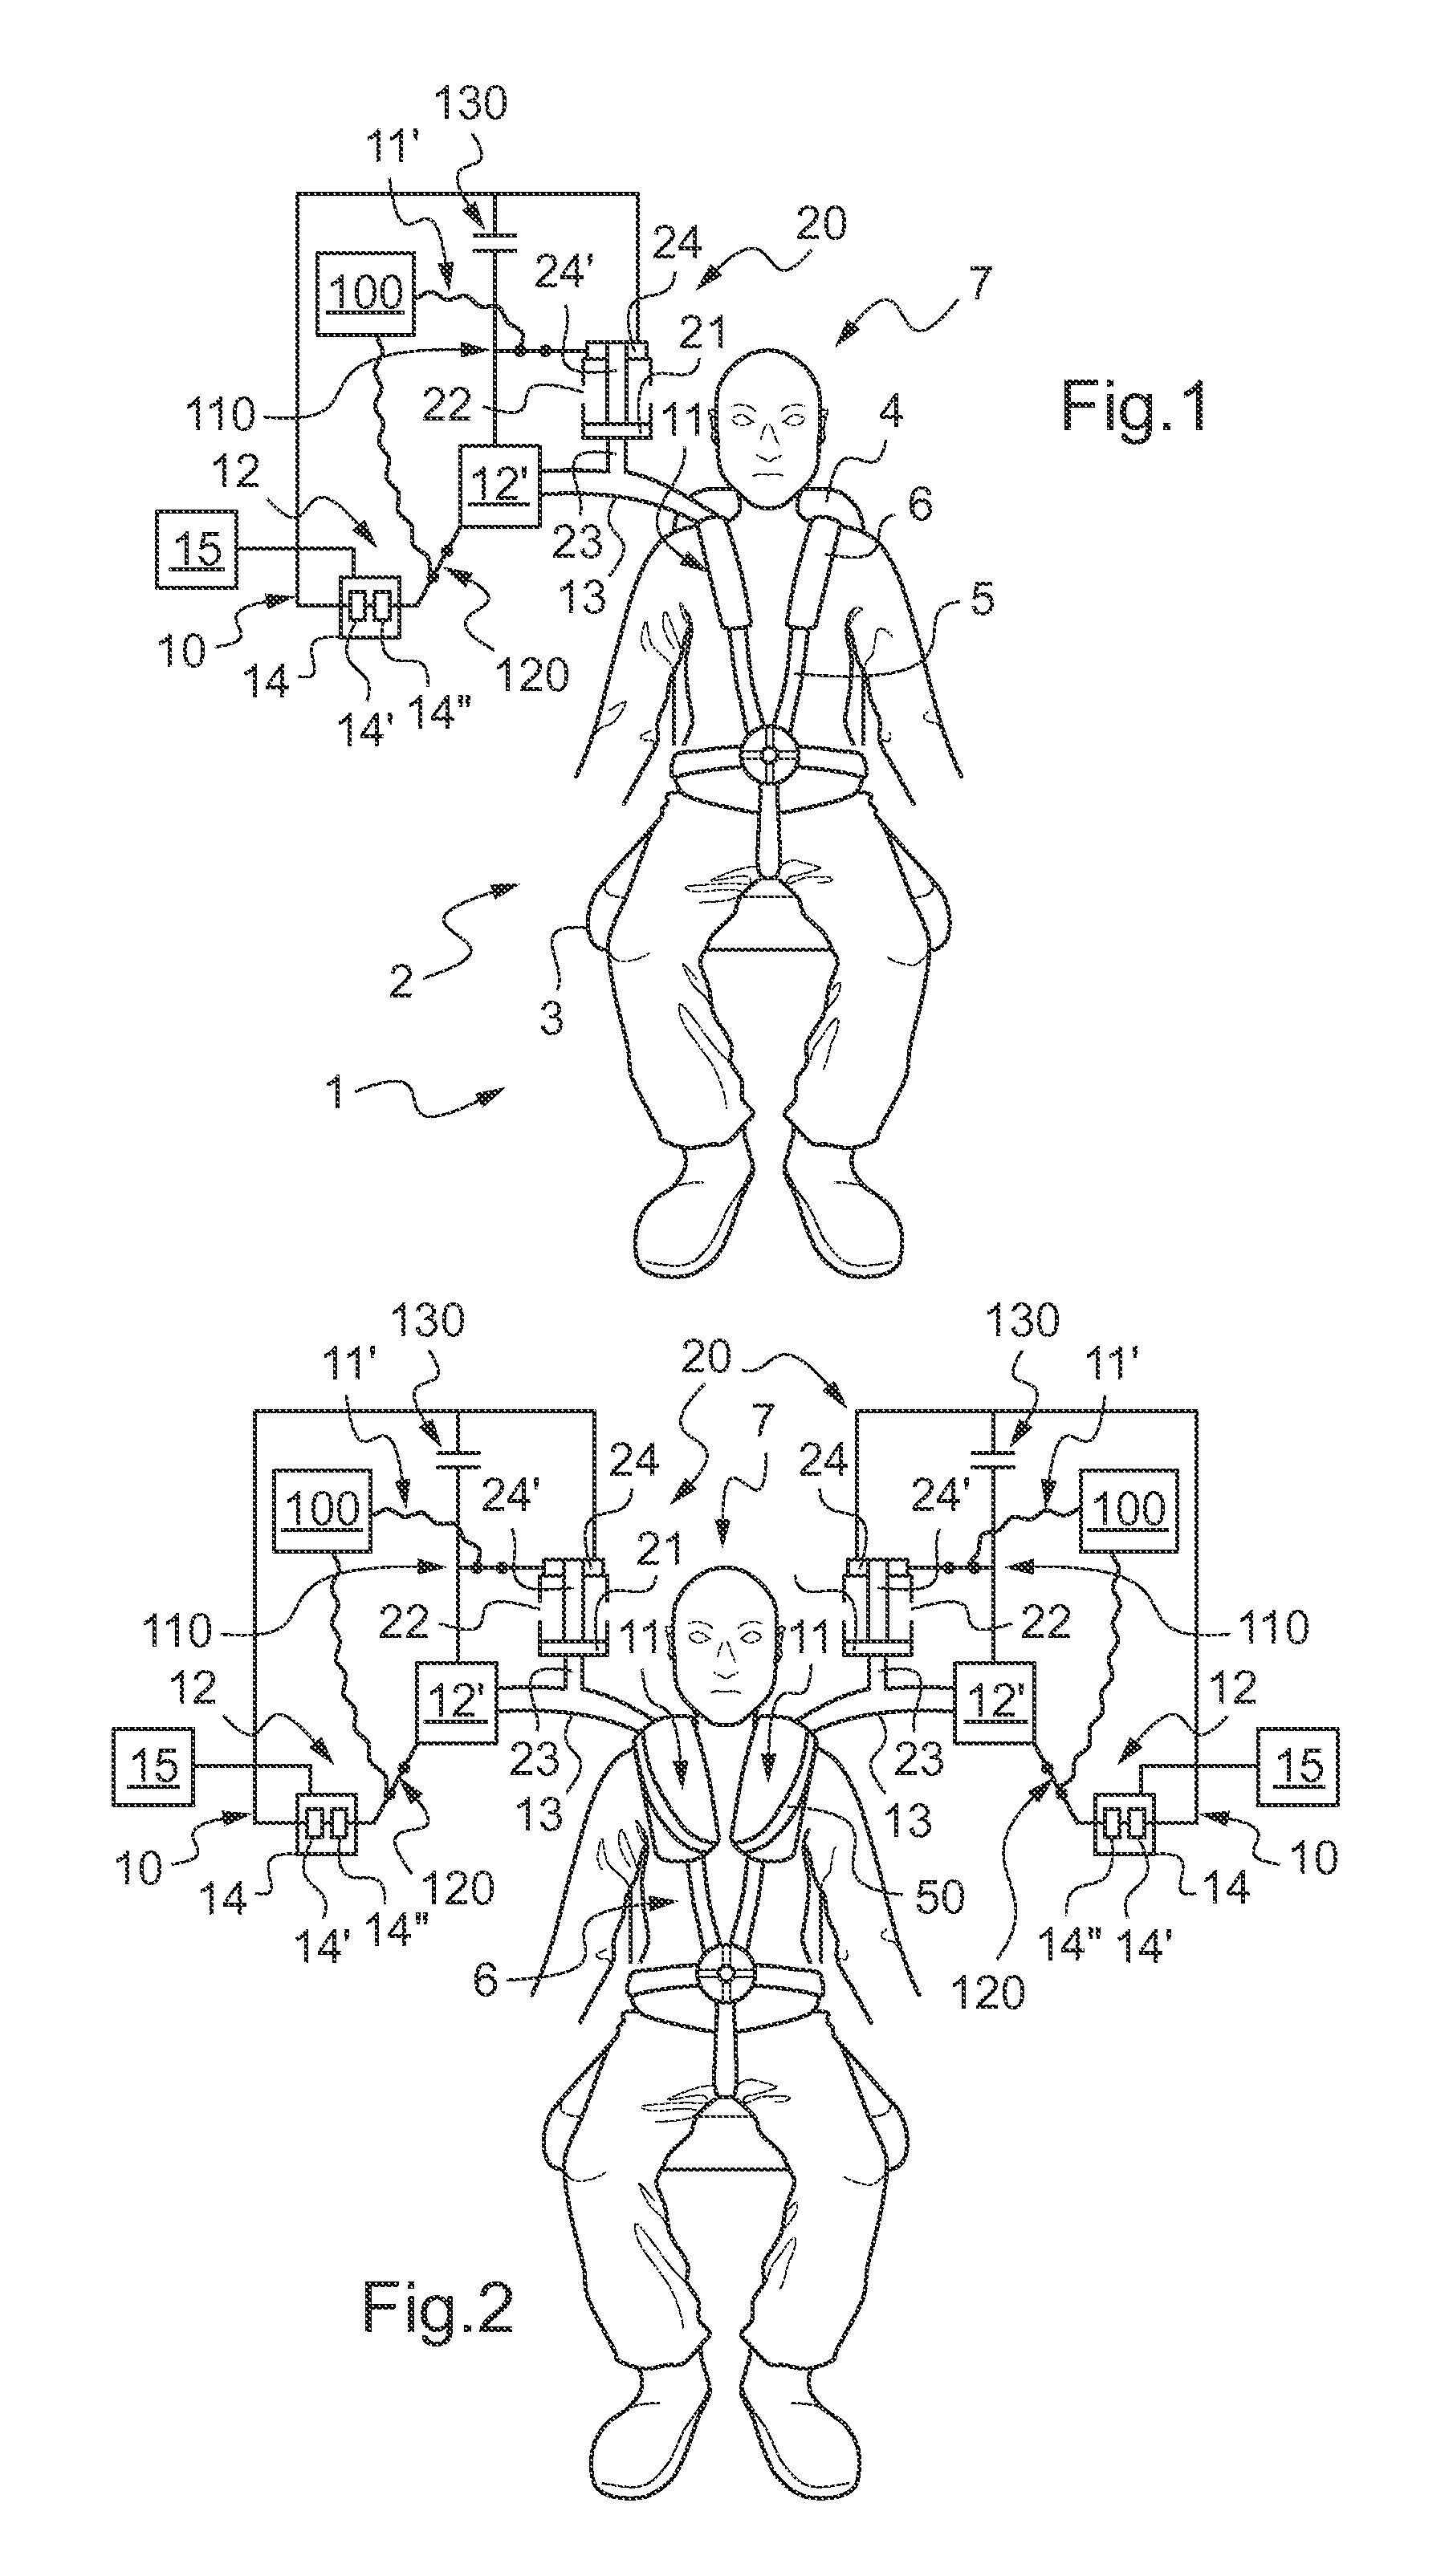 Protective device for protecting an occupant of a vehicle, a seat, and an associated vehicle